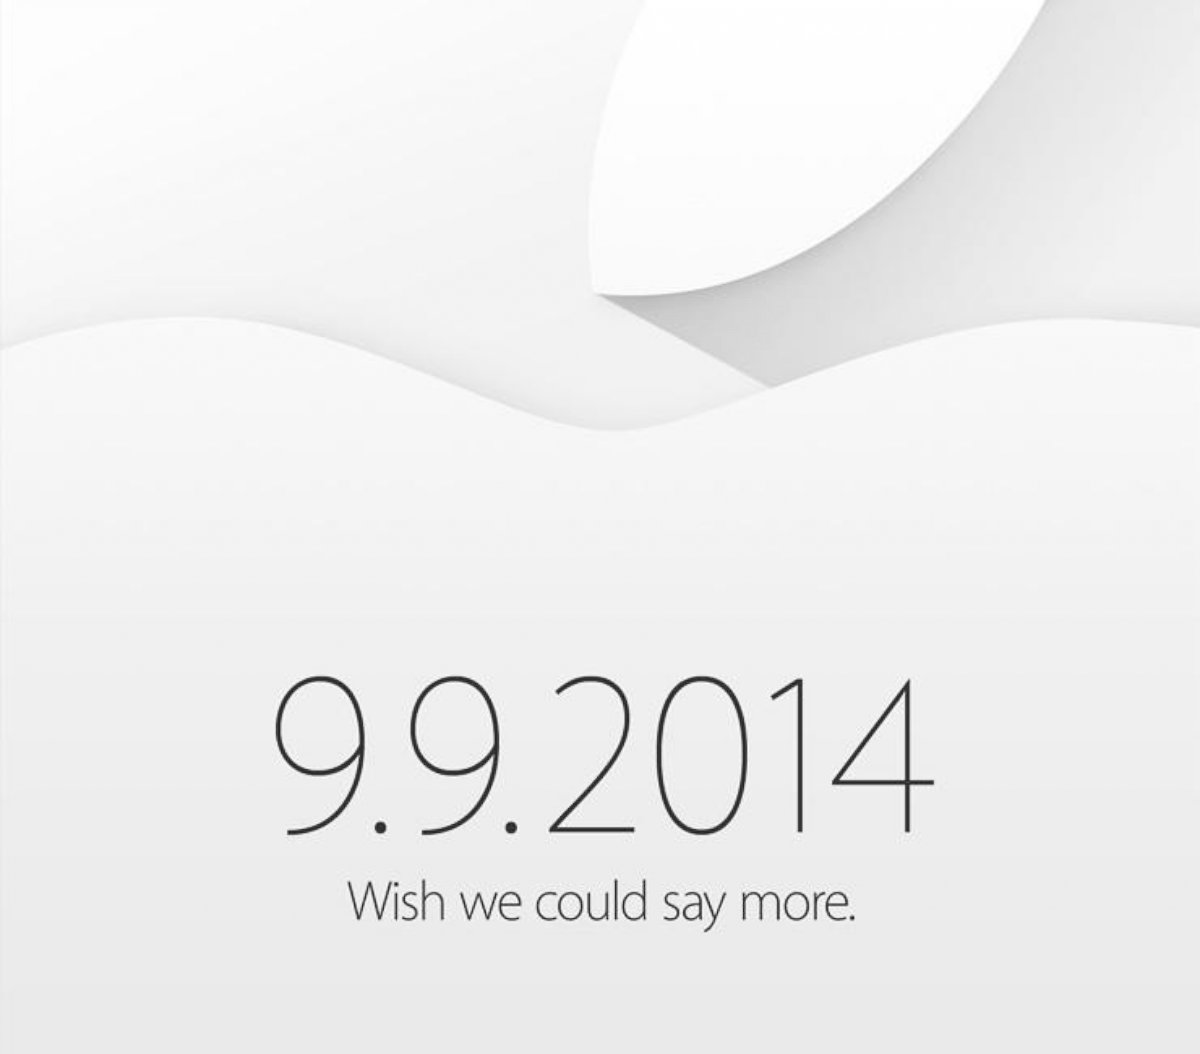 PHOTO: An invitation to a special event taking place on Sept. 9, 2014 from Apple